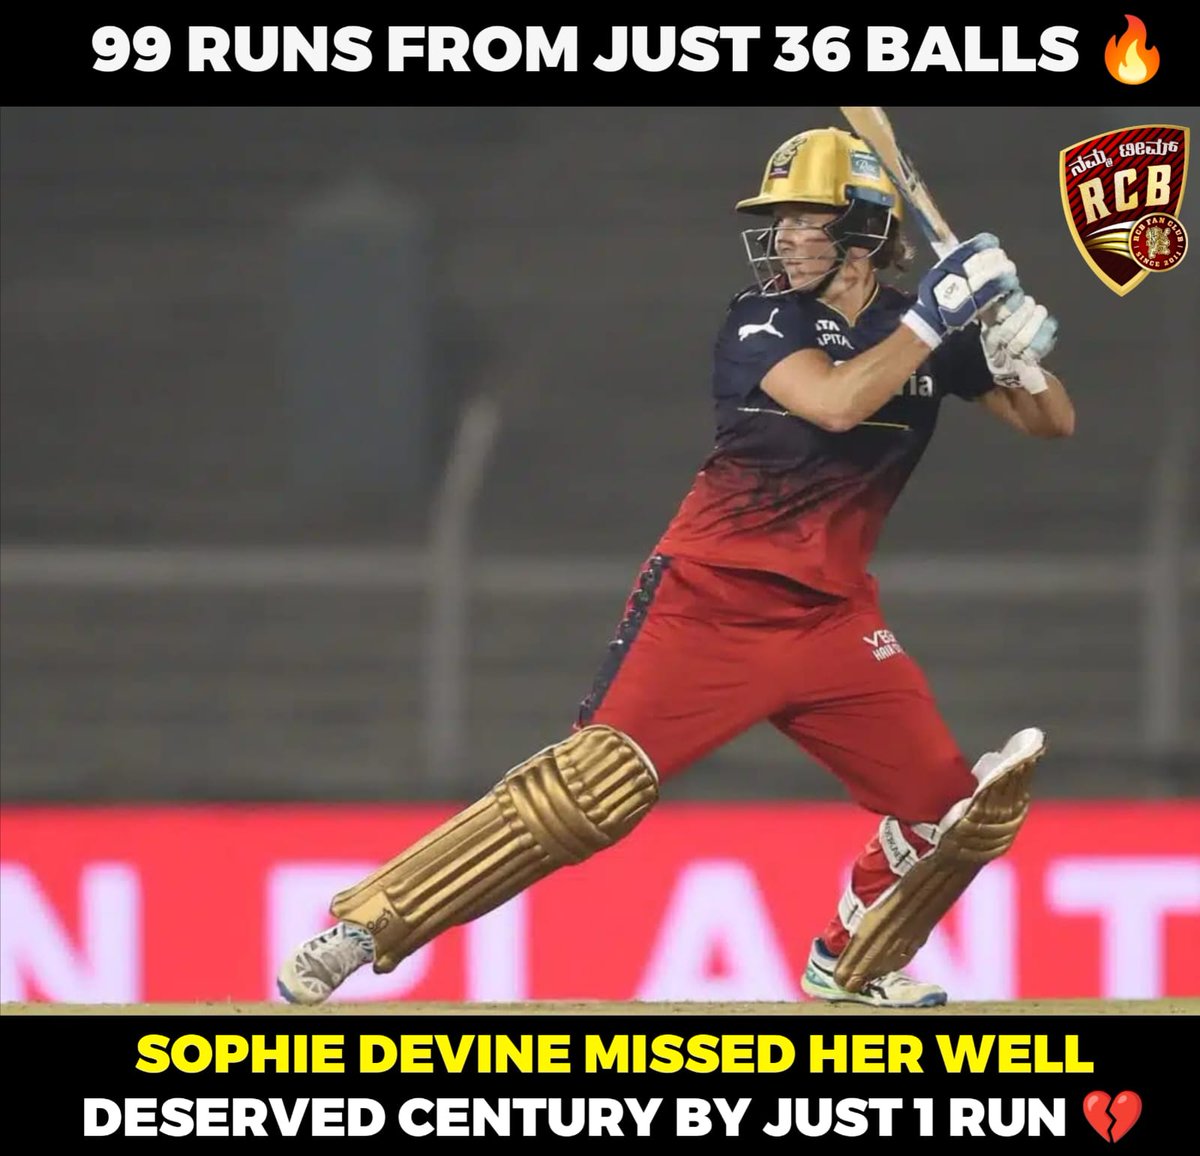 Well played Sophie Devine 👏 

#NammaTeamRCB #WomensIPL